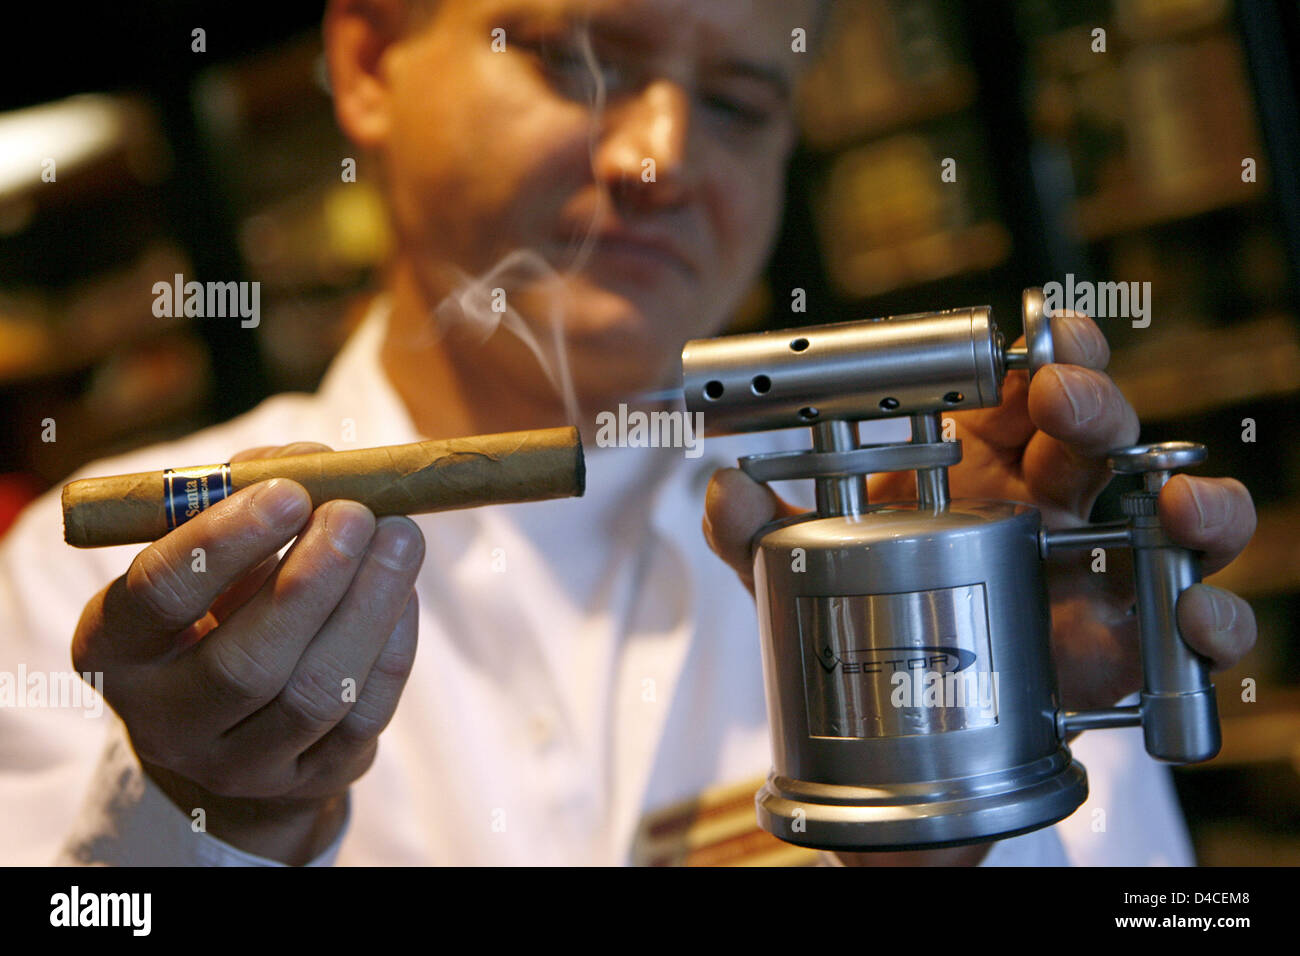 A staff member of cigar lounge 'Casa del Habano' skillfully lights a cigar with an appropriate lighter in the lounge's humidor in Nuremberg, Germany, 16 January 2008. The two-storey lounge in colonial style was opened in downtown Nuremberg in 2006. Photo: Daniel Karmann Stock Photo